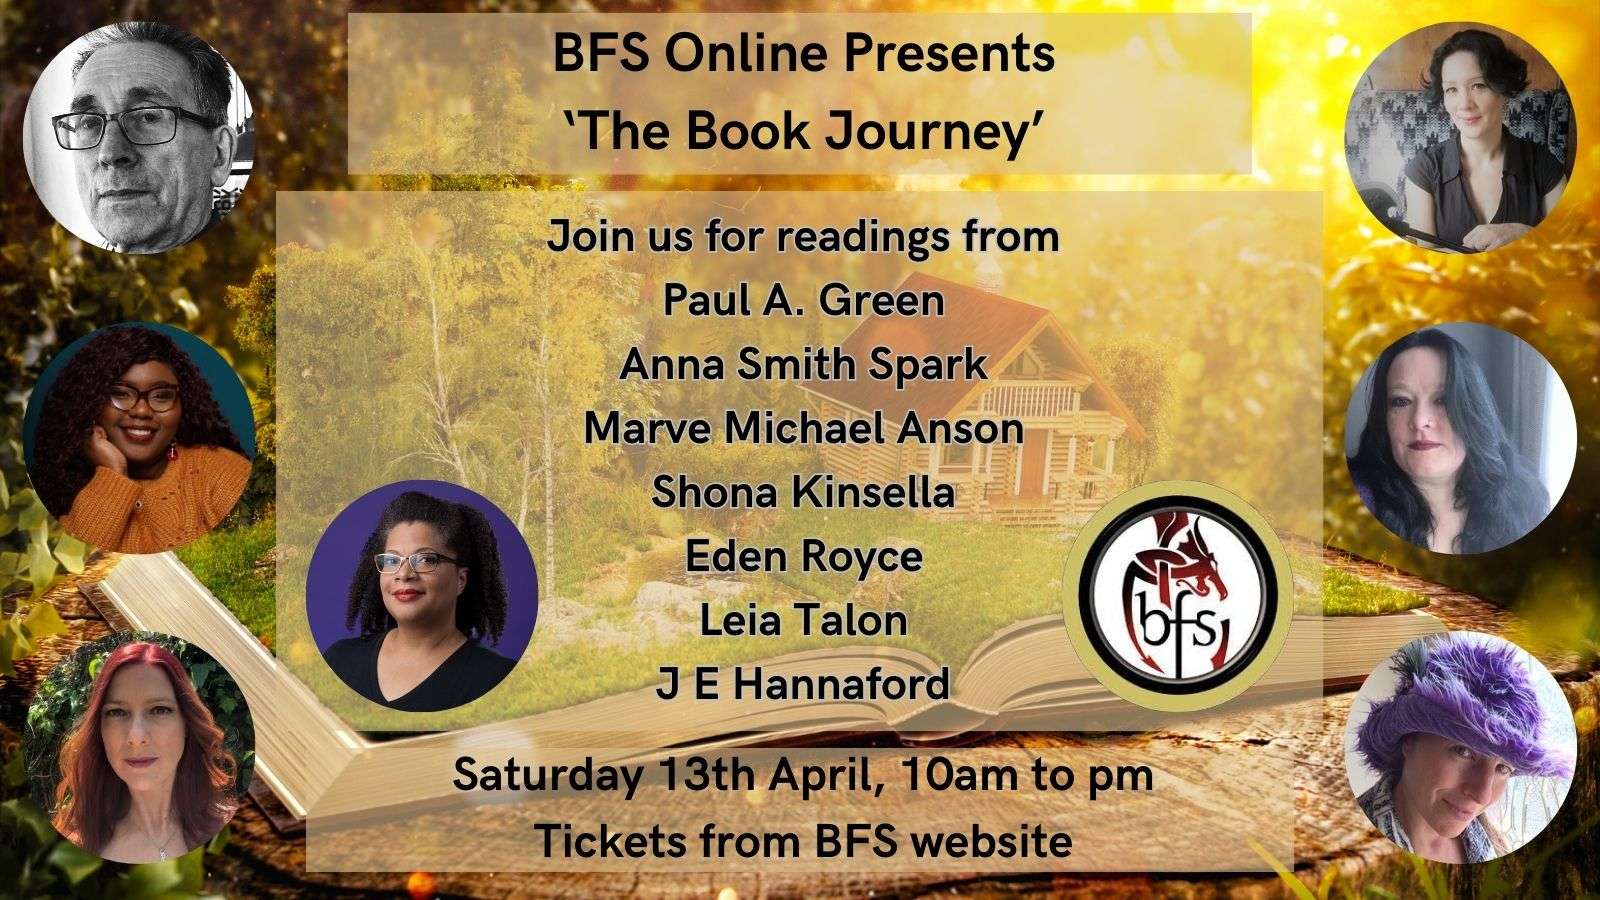 BFS Online: The Book Journey – Readings